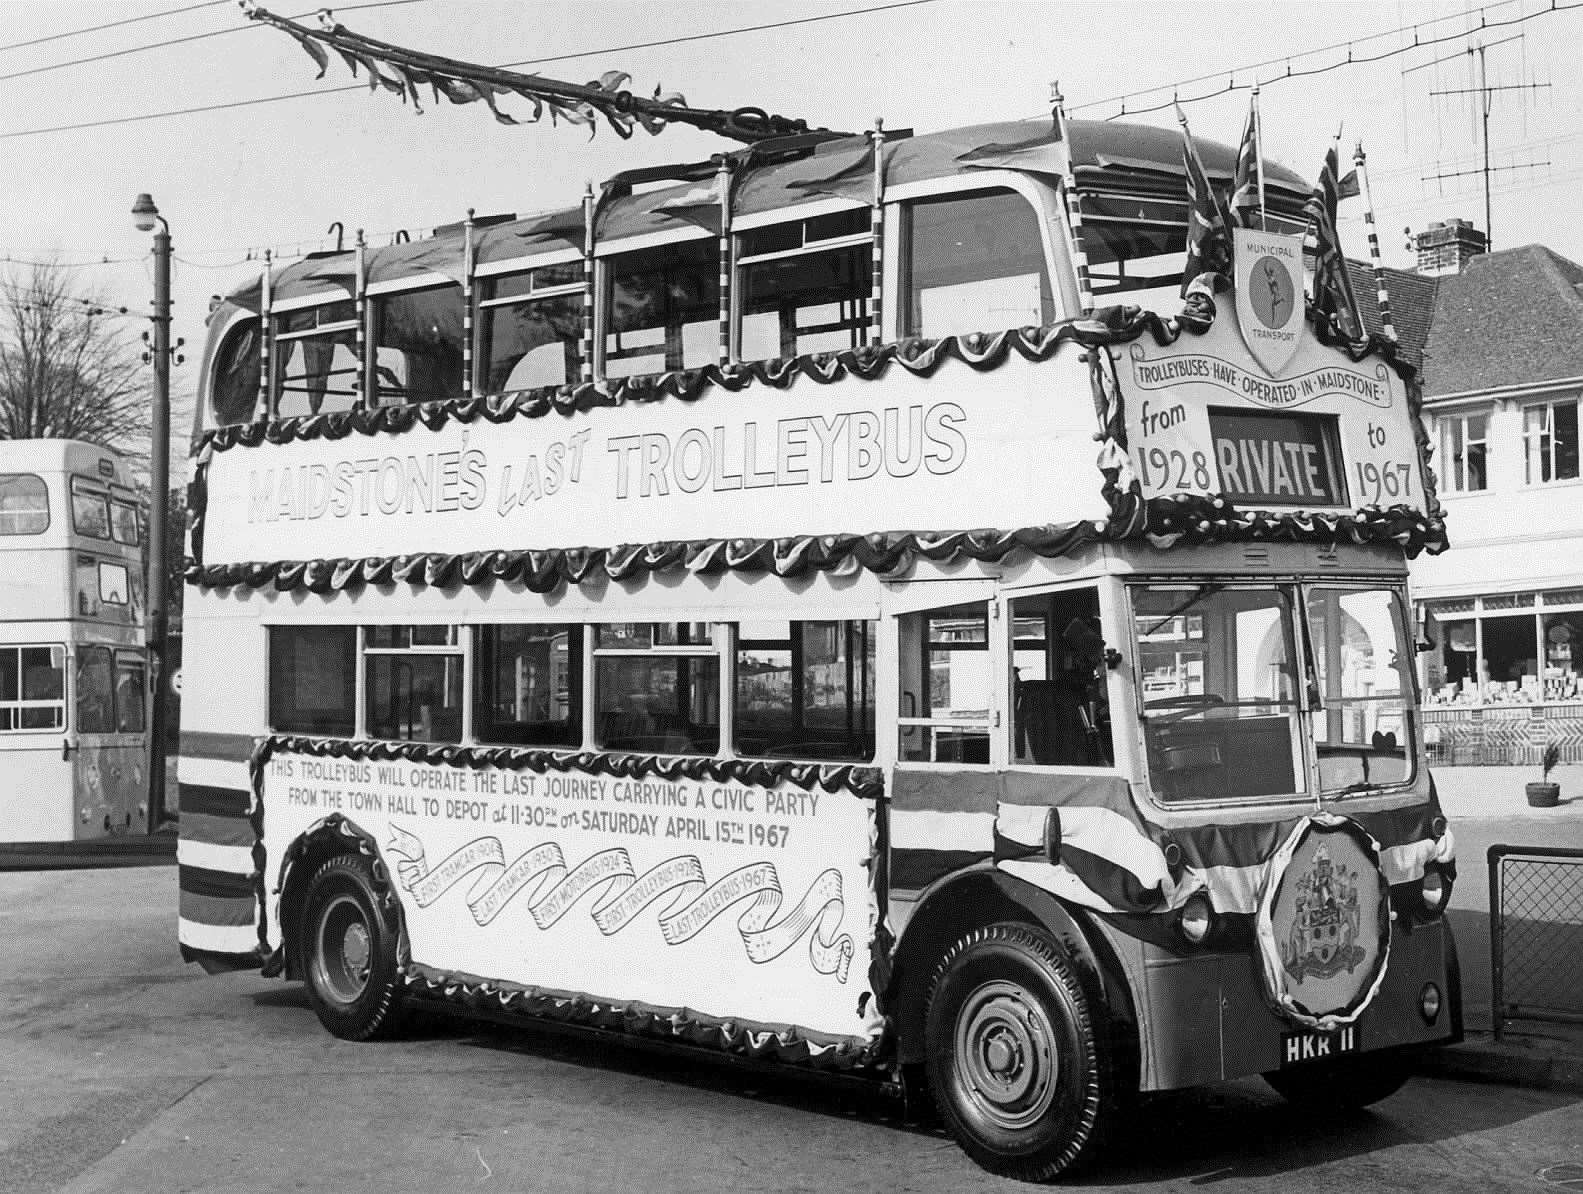 Maidstone's last trolleybus, pictured in April 1967